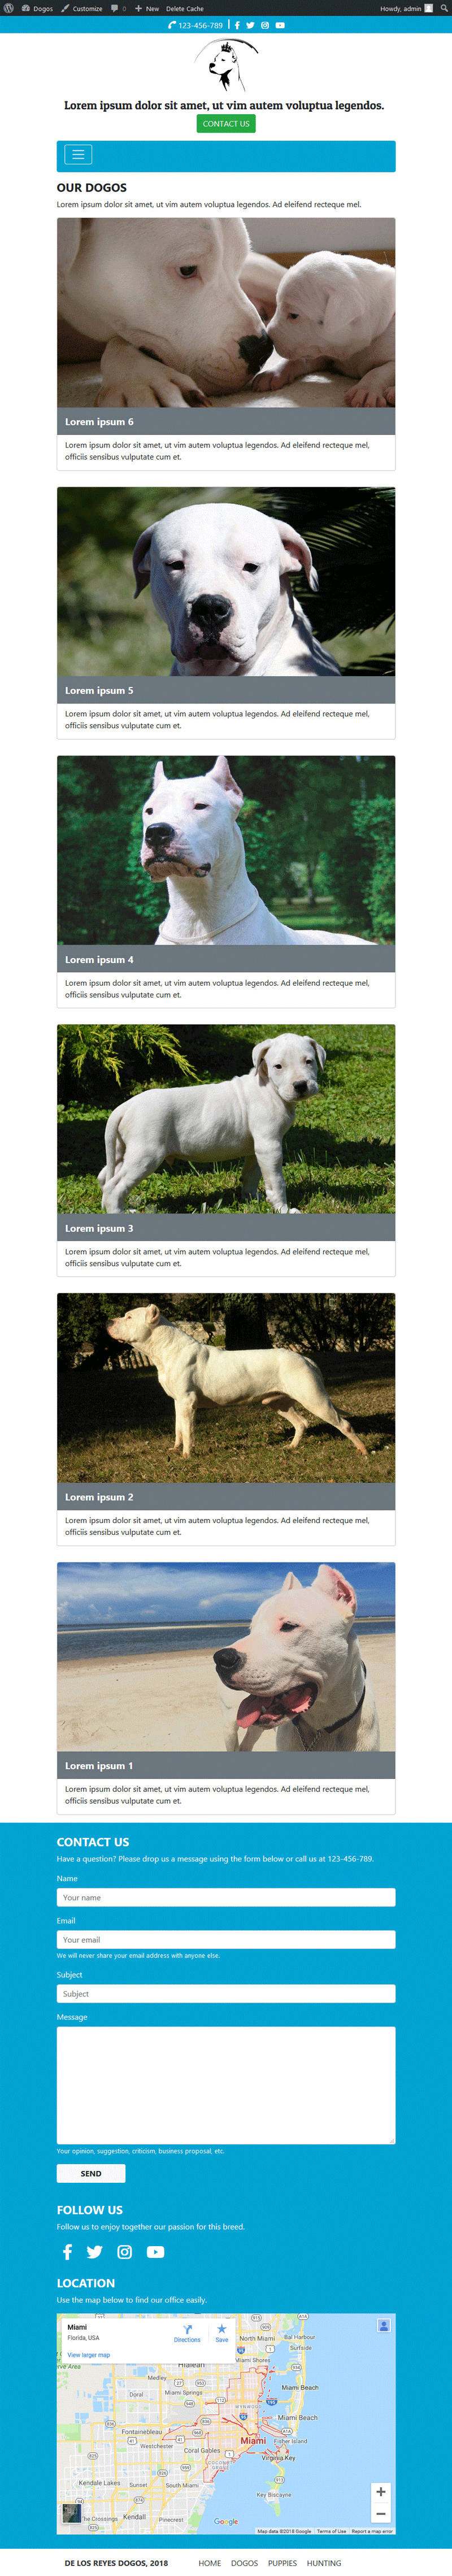 Website "De Los Reyes Dogos": Page "Archive" viewed on small-screen devices.